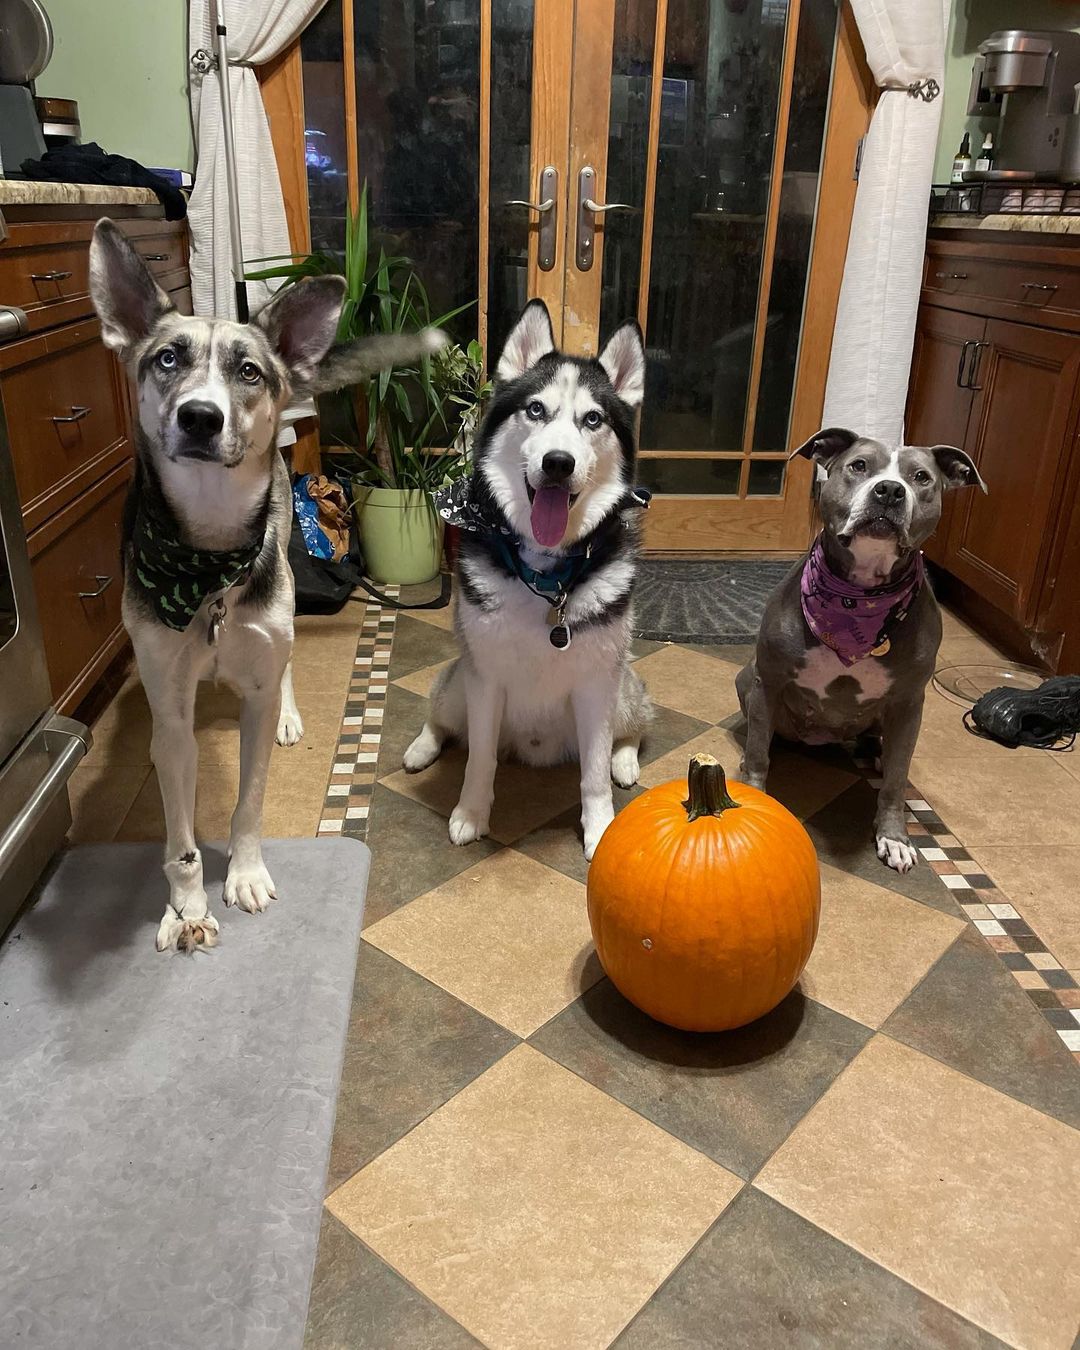 Jenny & Graf wish everyone a Happy Halloween 🎃 from New Jersey! 

<a target='_blank' href='https://www.instagram.com/explore/tags/bakudogs/'>#bakudogs</a> <a target='_blank' href='https://www.instagram.com/explore/tags/bakudogsinnj/'>#bakudogsinnj</a>